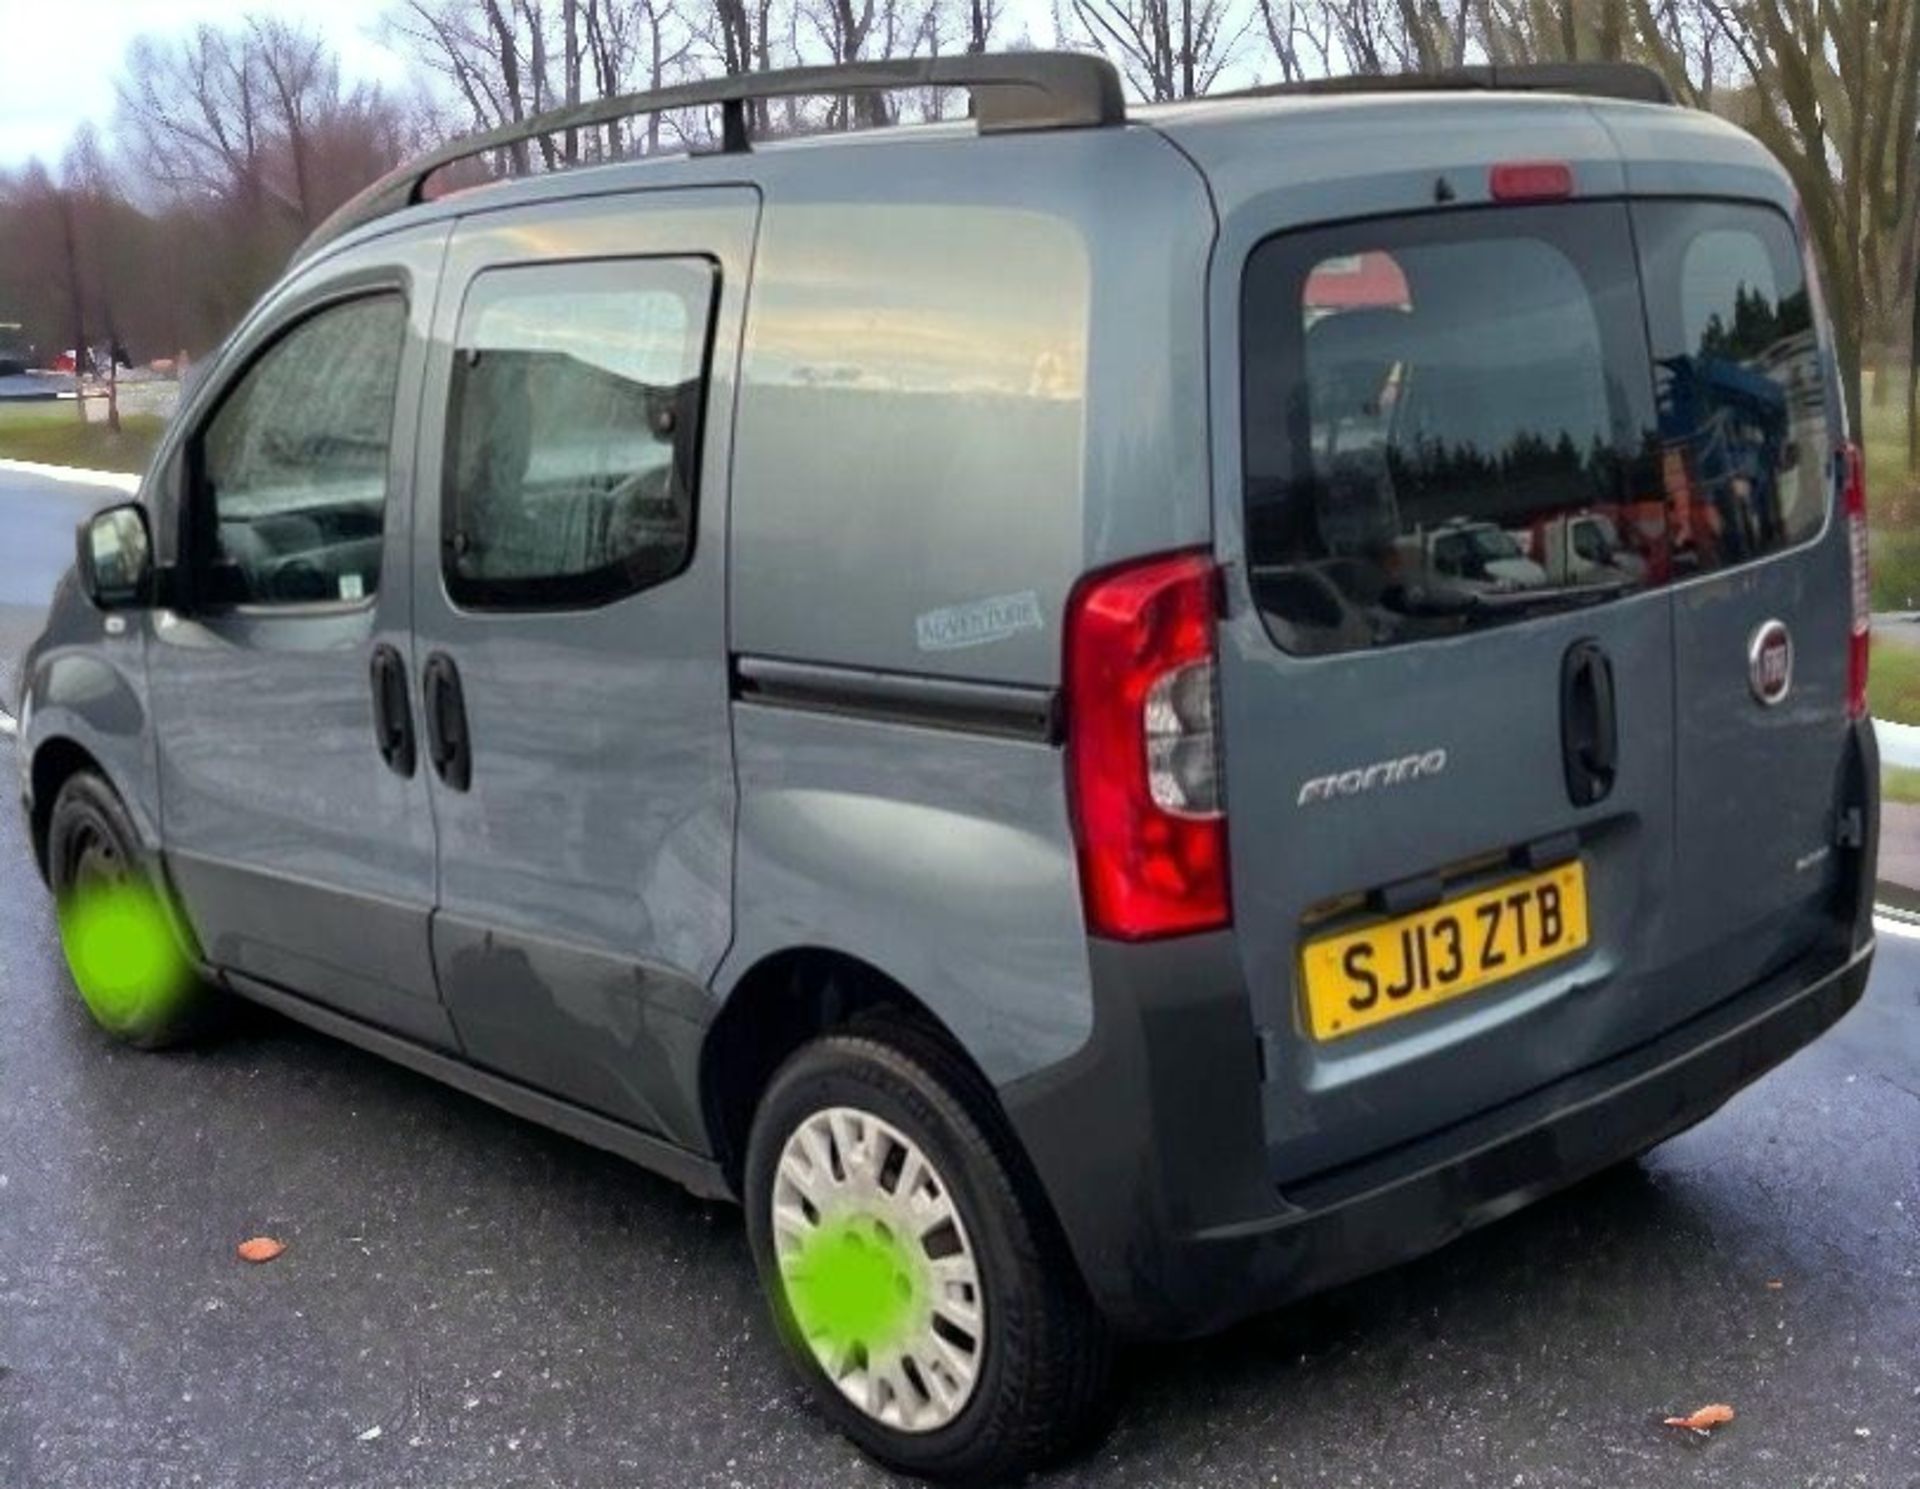 2013 FIAT FIORINO 16V ADVENTURE MULTIJET CREW VAN HPI CLEAR -(ONLY 76 K MILES ) - READY TO GO! - Image 2 of 11